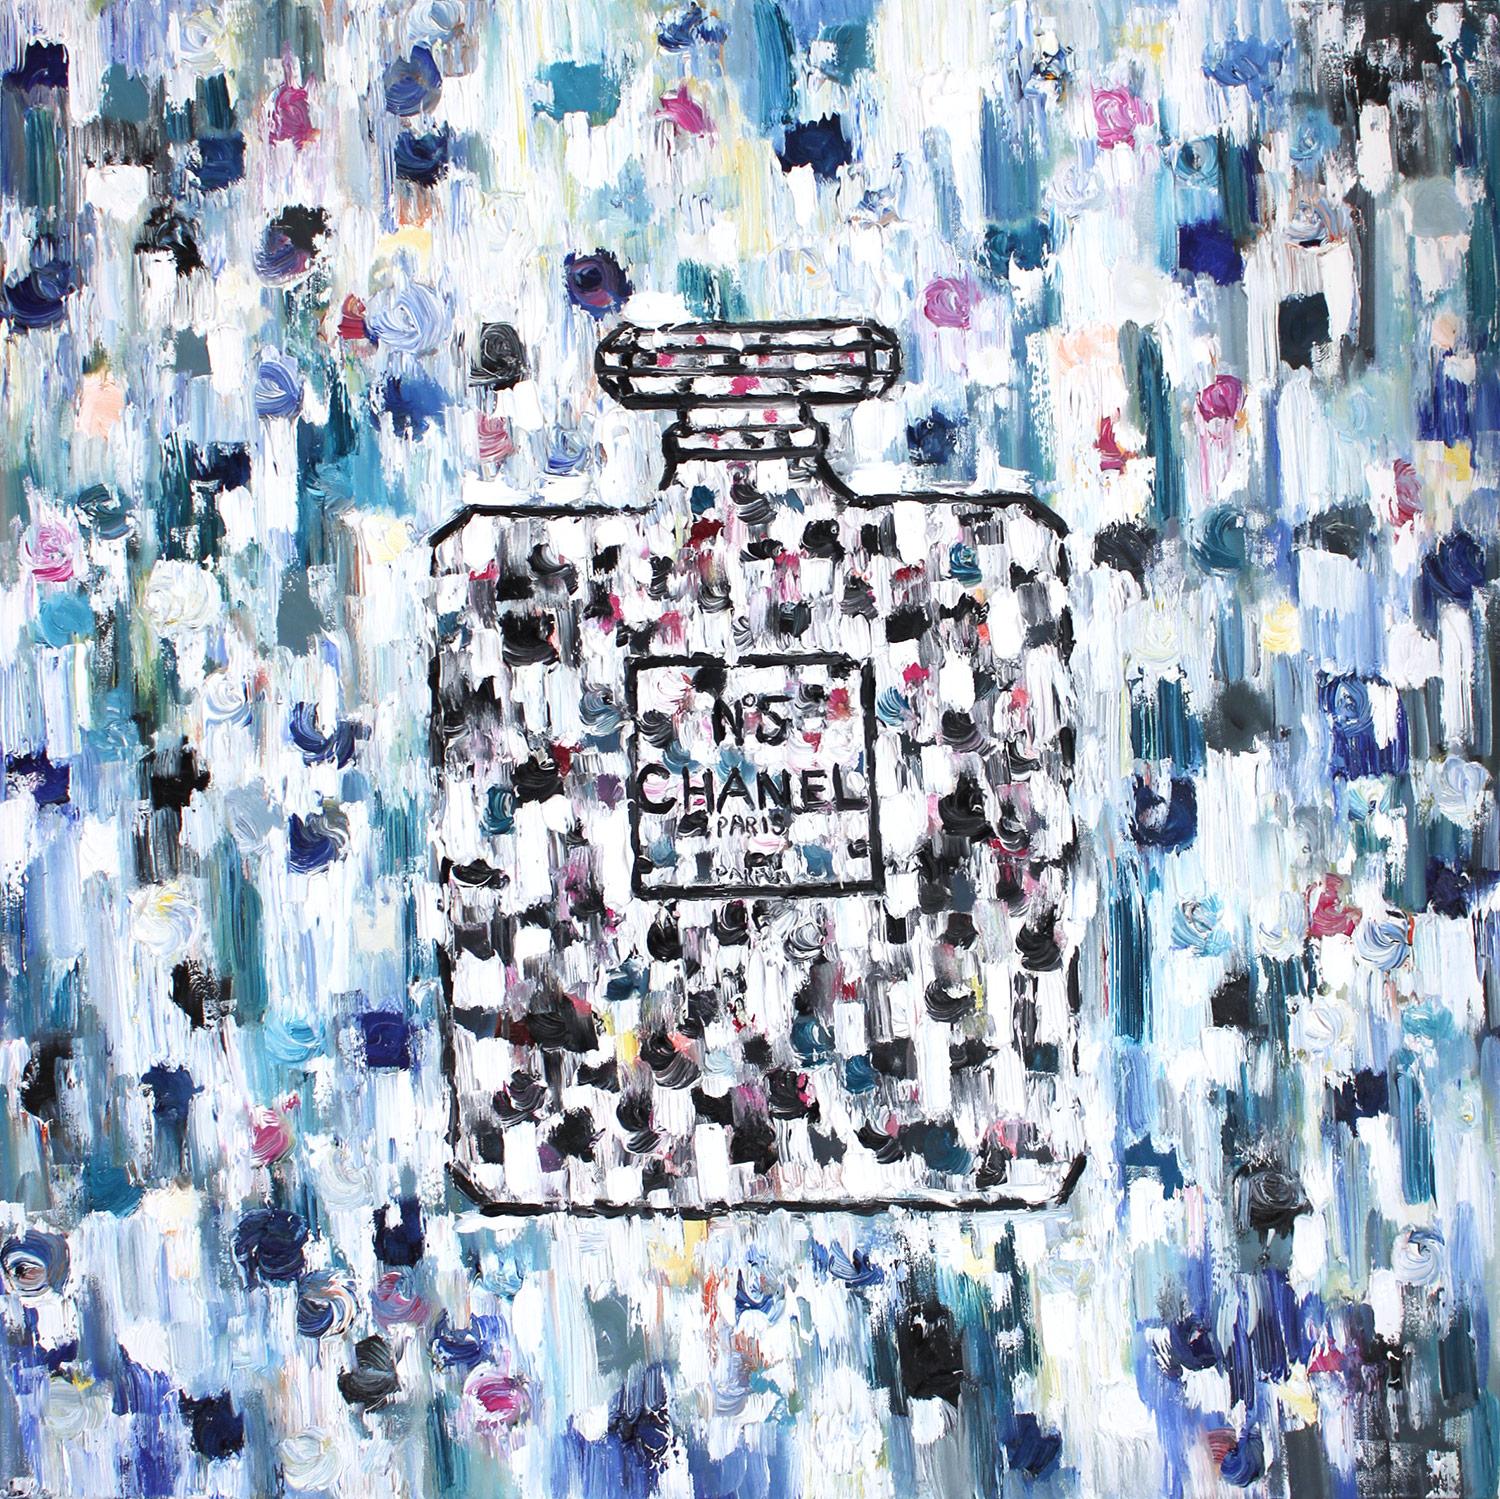 Cindy Shaoul Still-Life Painting - "Dripping Dots - Chanel in St. Tropez" Oil On Canvas Chanel Perfume Bottle